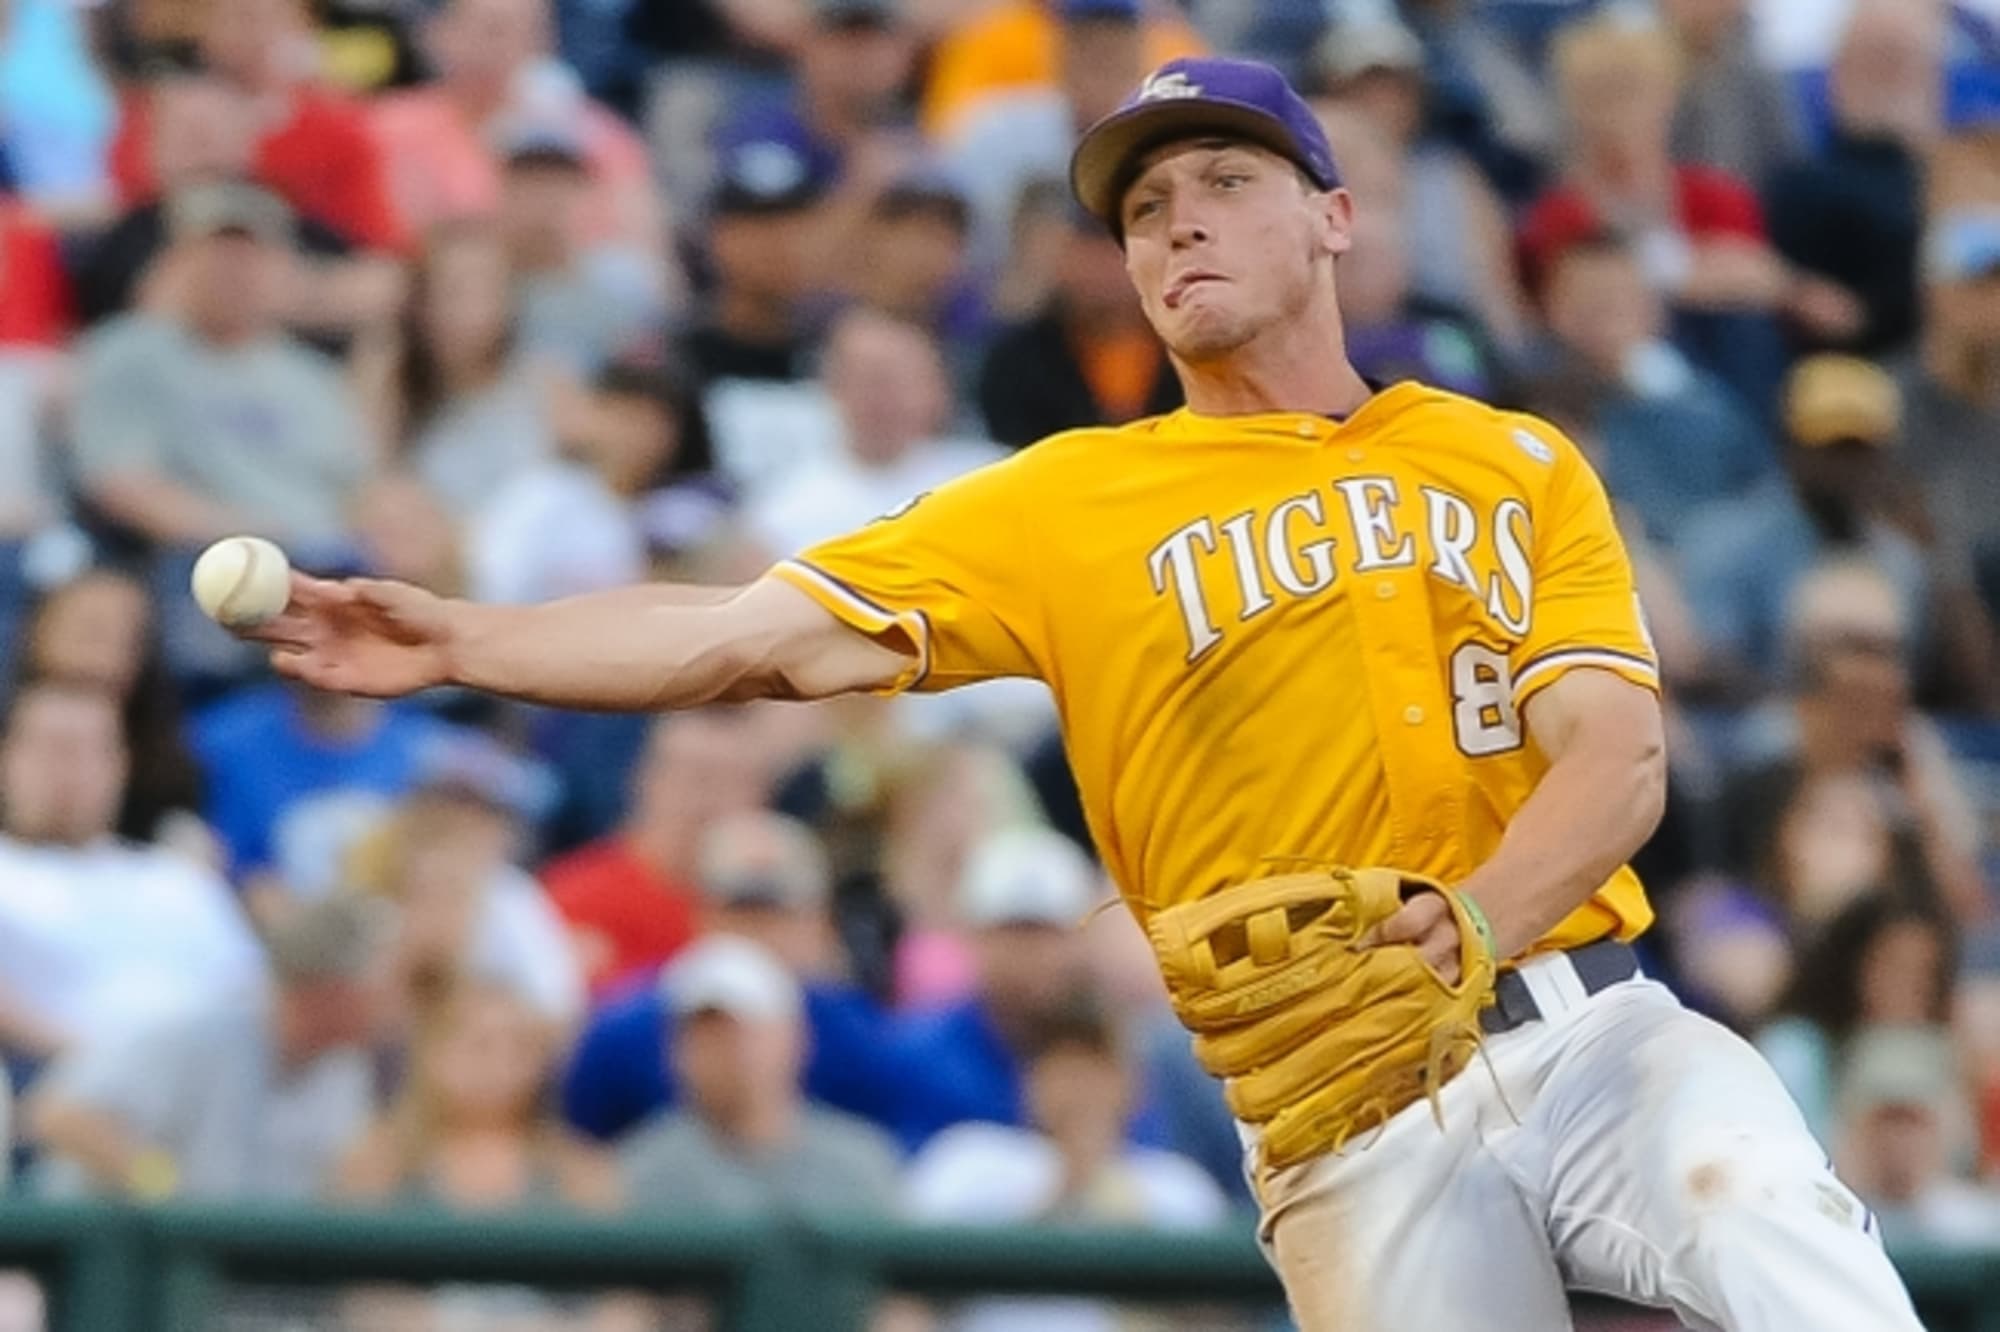 LSU baseball: The legacy of the No. 8 Jersey